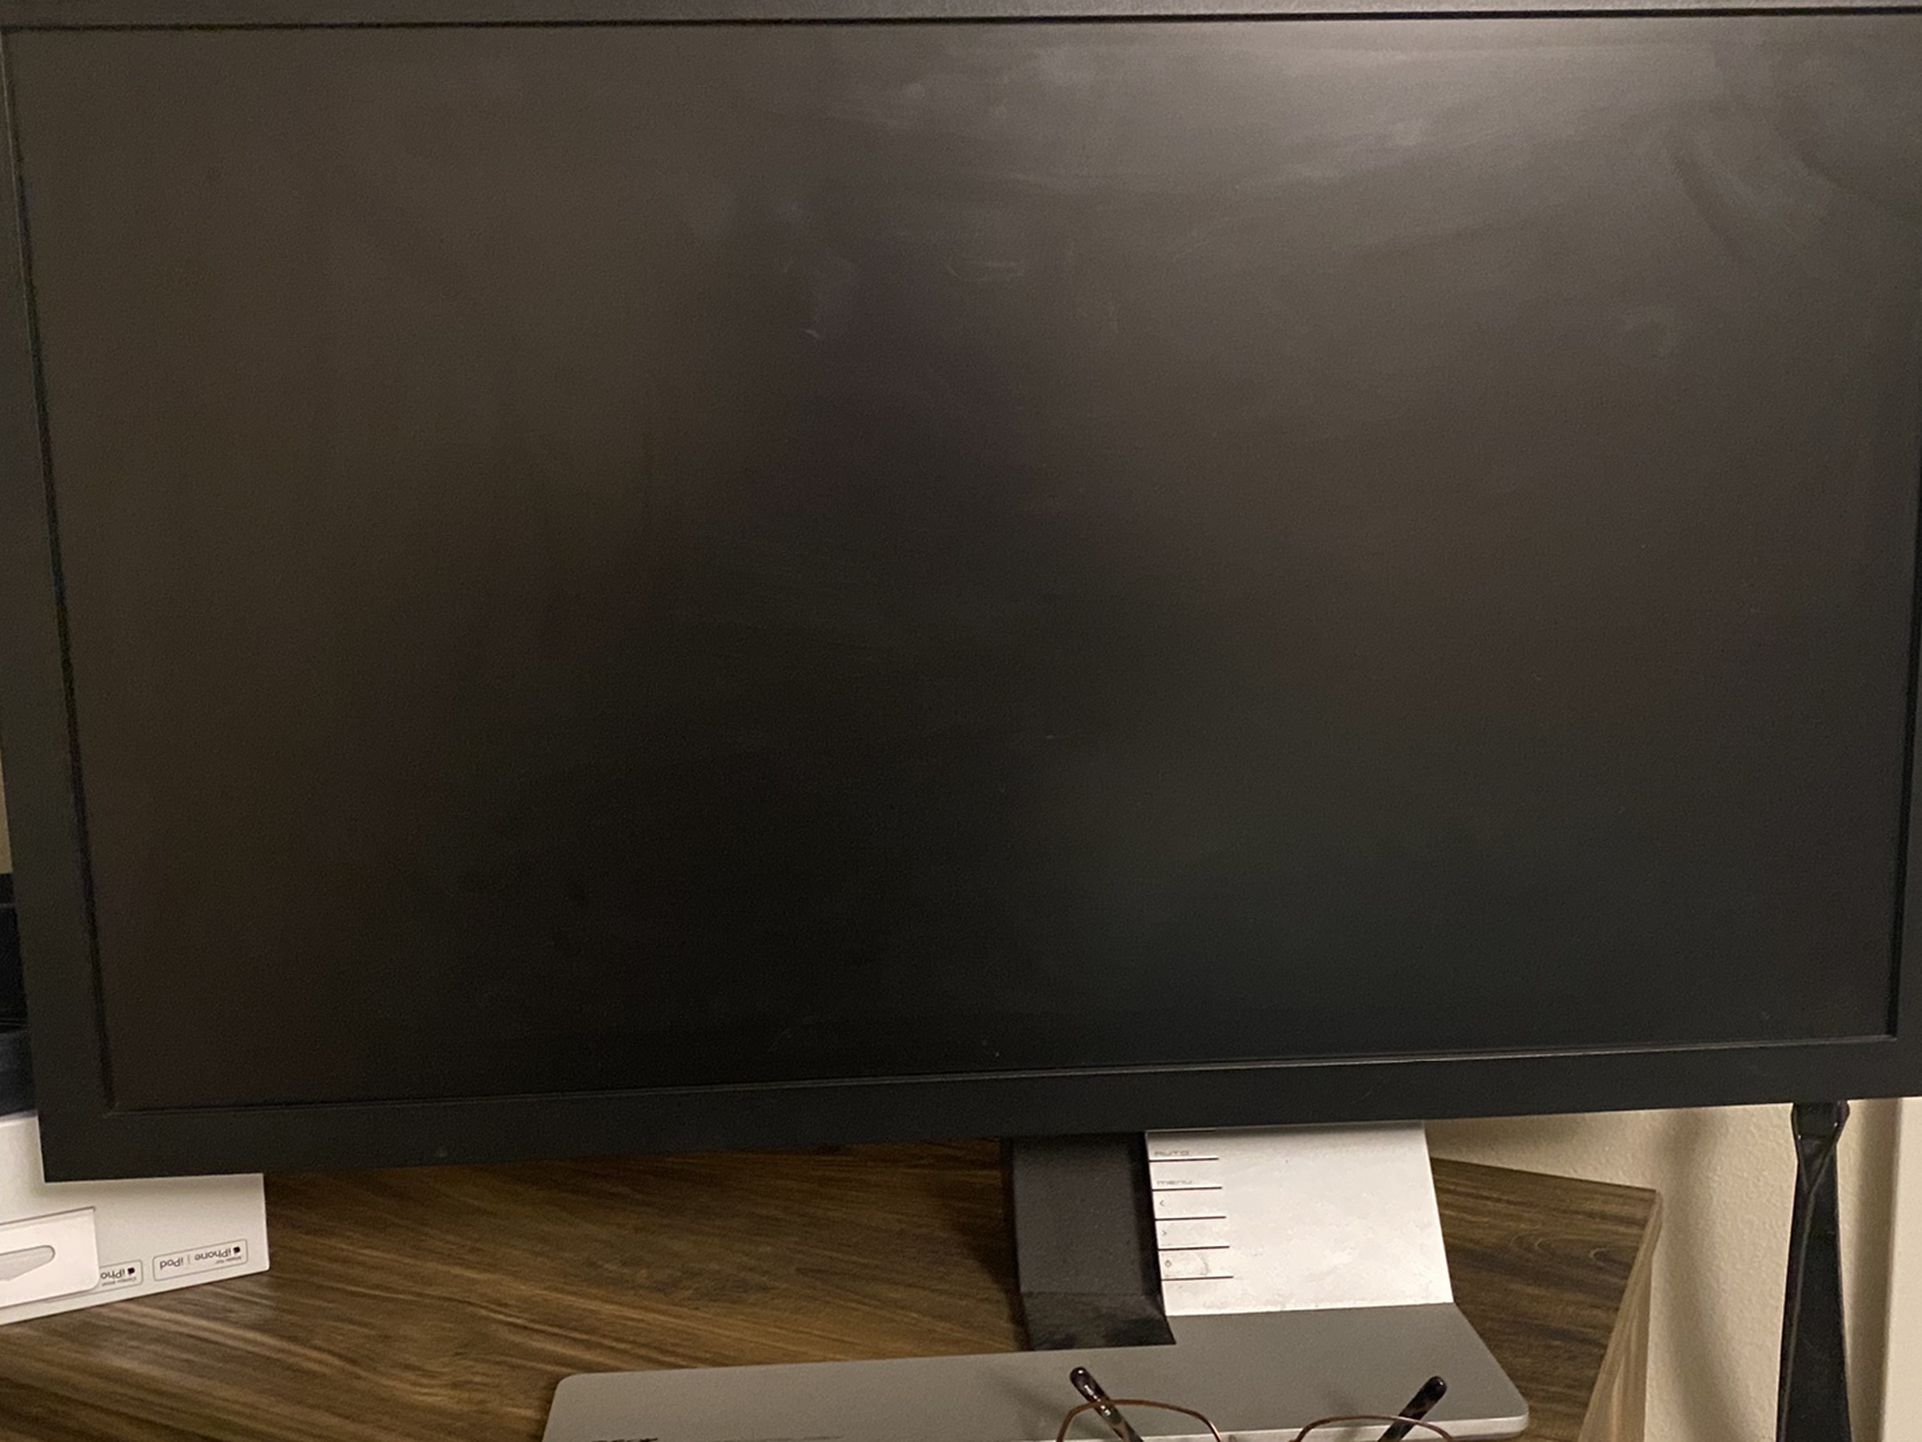 Acer S273HL Gaming Monitor